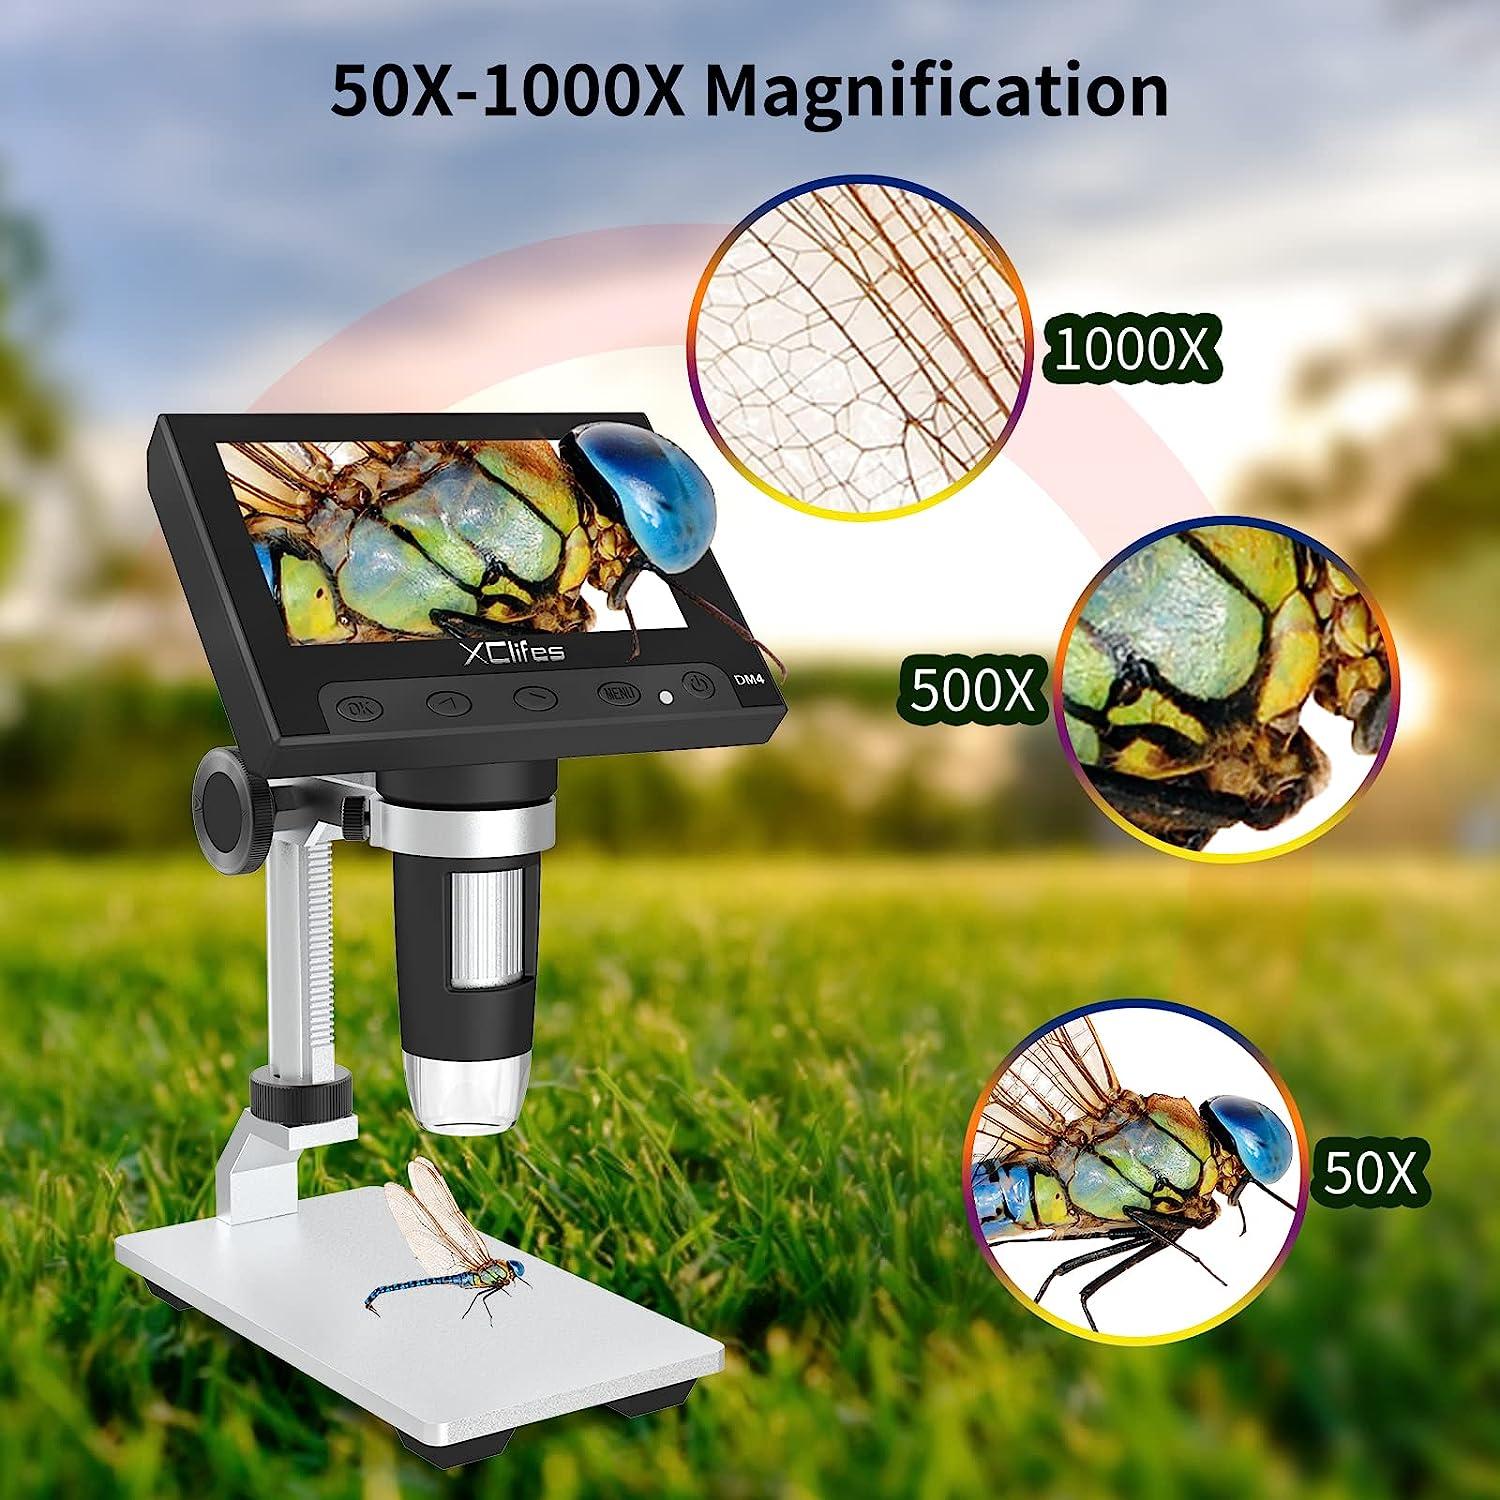 Digital Coin Microscope 4.3 inch Screen Handheld Microscope 1080p LCD  Digital Microscope Video Camera 1000X Coin Magnifier with 8 Adjustable LED  Lights for PCB Soldering for Adults/Kids Outside Use.